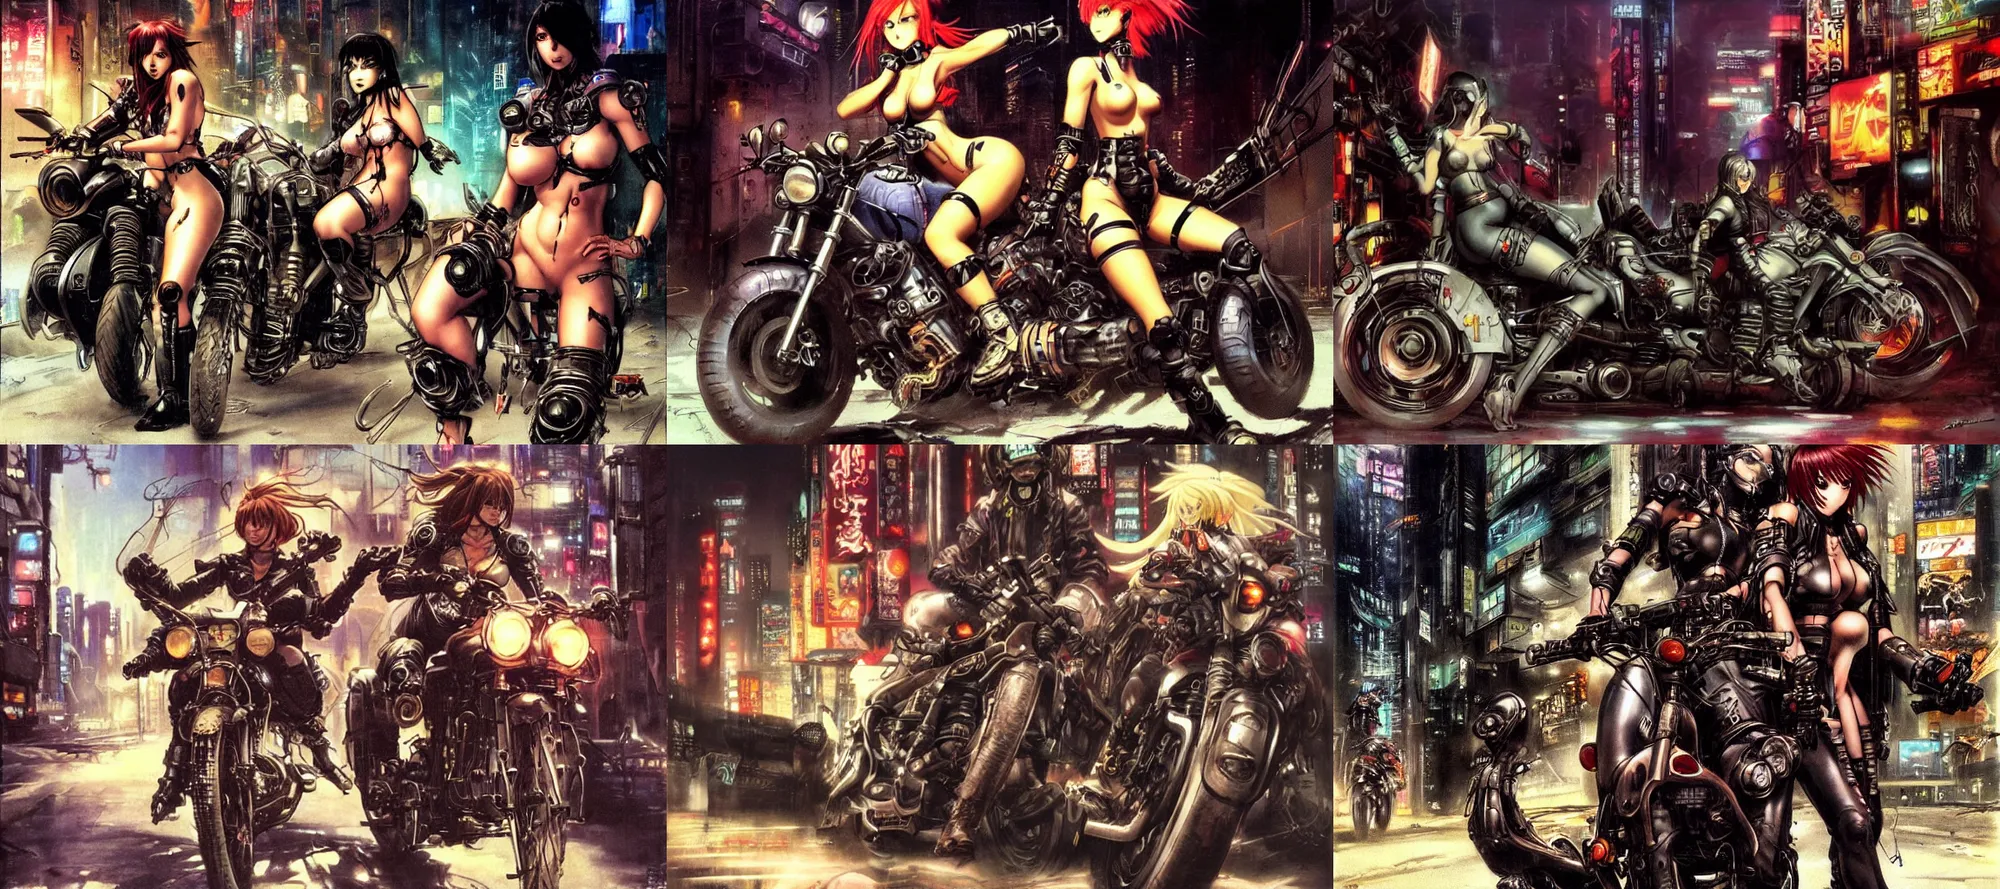 Prompt: 2 attractive cyberpunk females on motorcycles in a gritty futuristic anime city at night, art by Simon Bisley Frank Frazetta Martin Emond